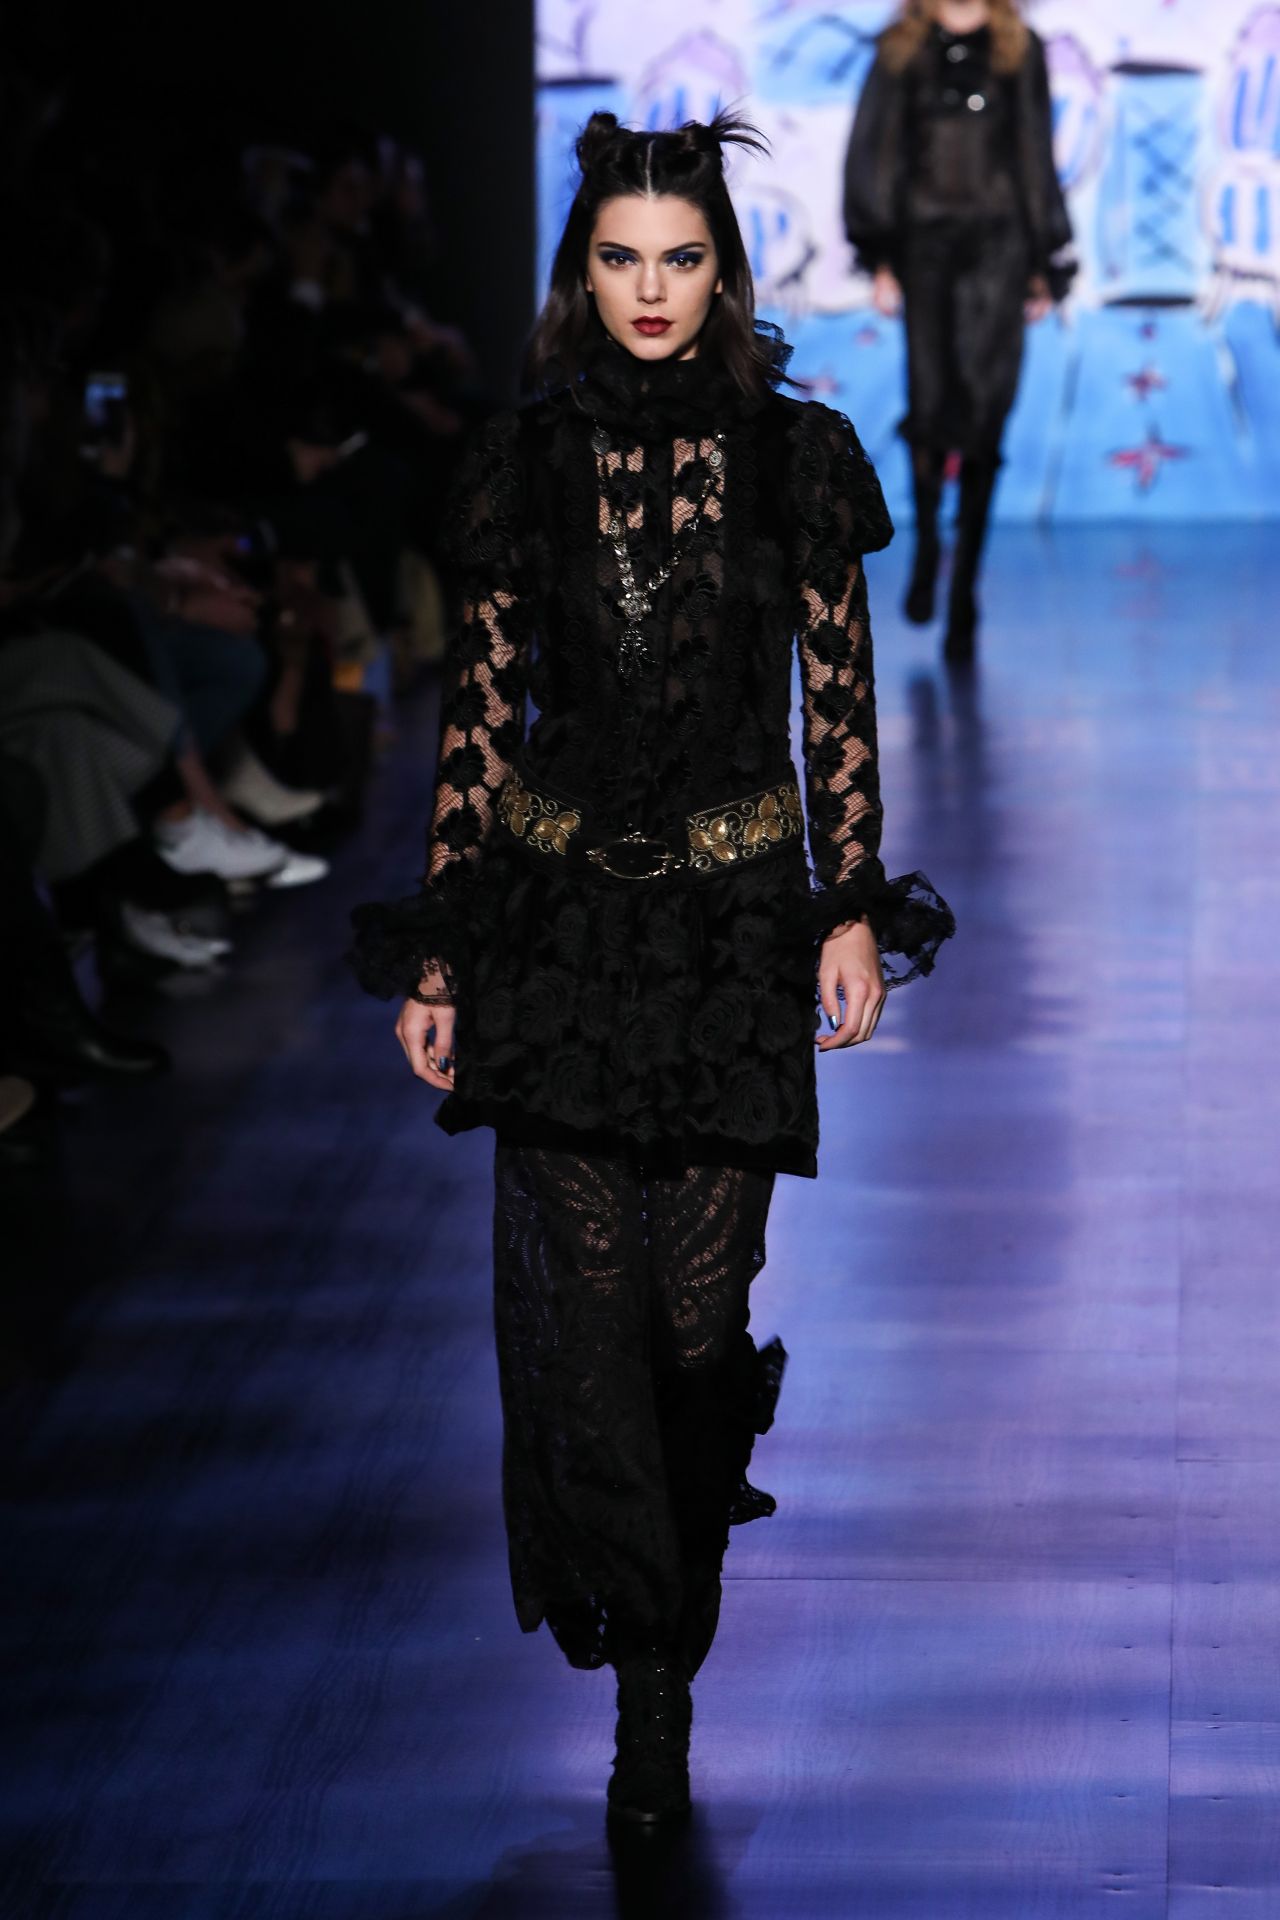 Kendall Jenner Supermodel Runway Walk - Anna Sui Fashion Show in NYC 2 ...